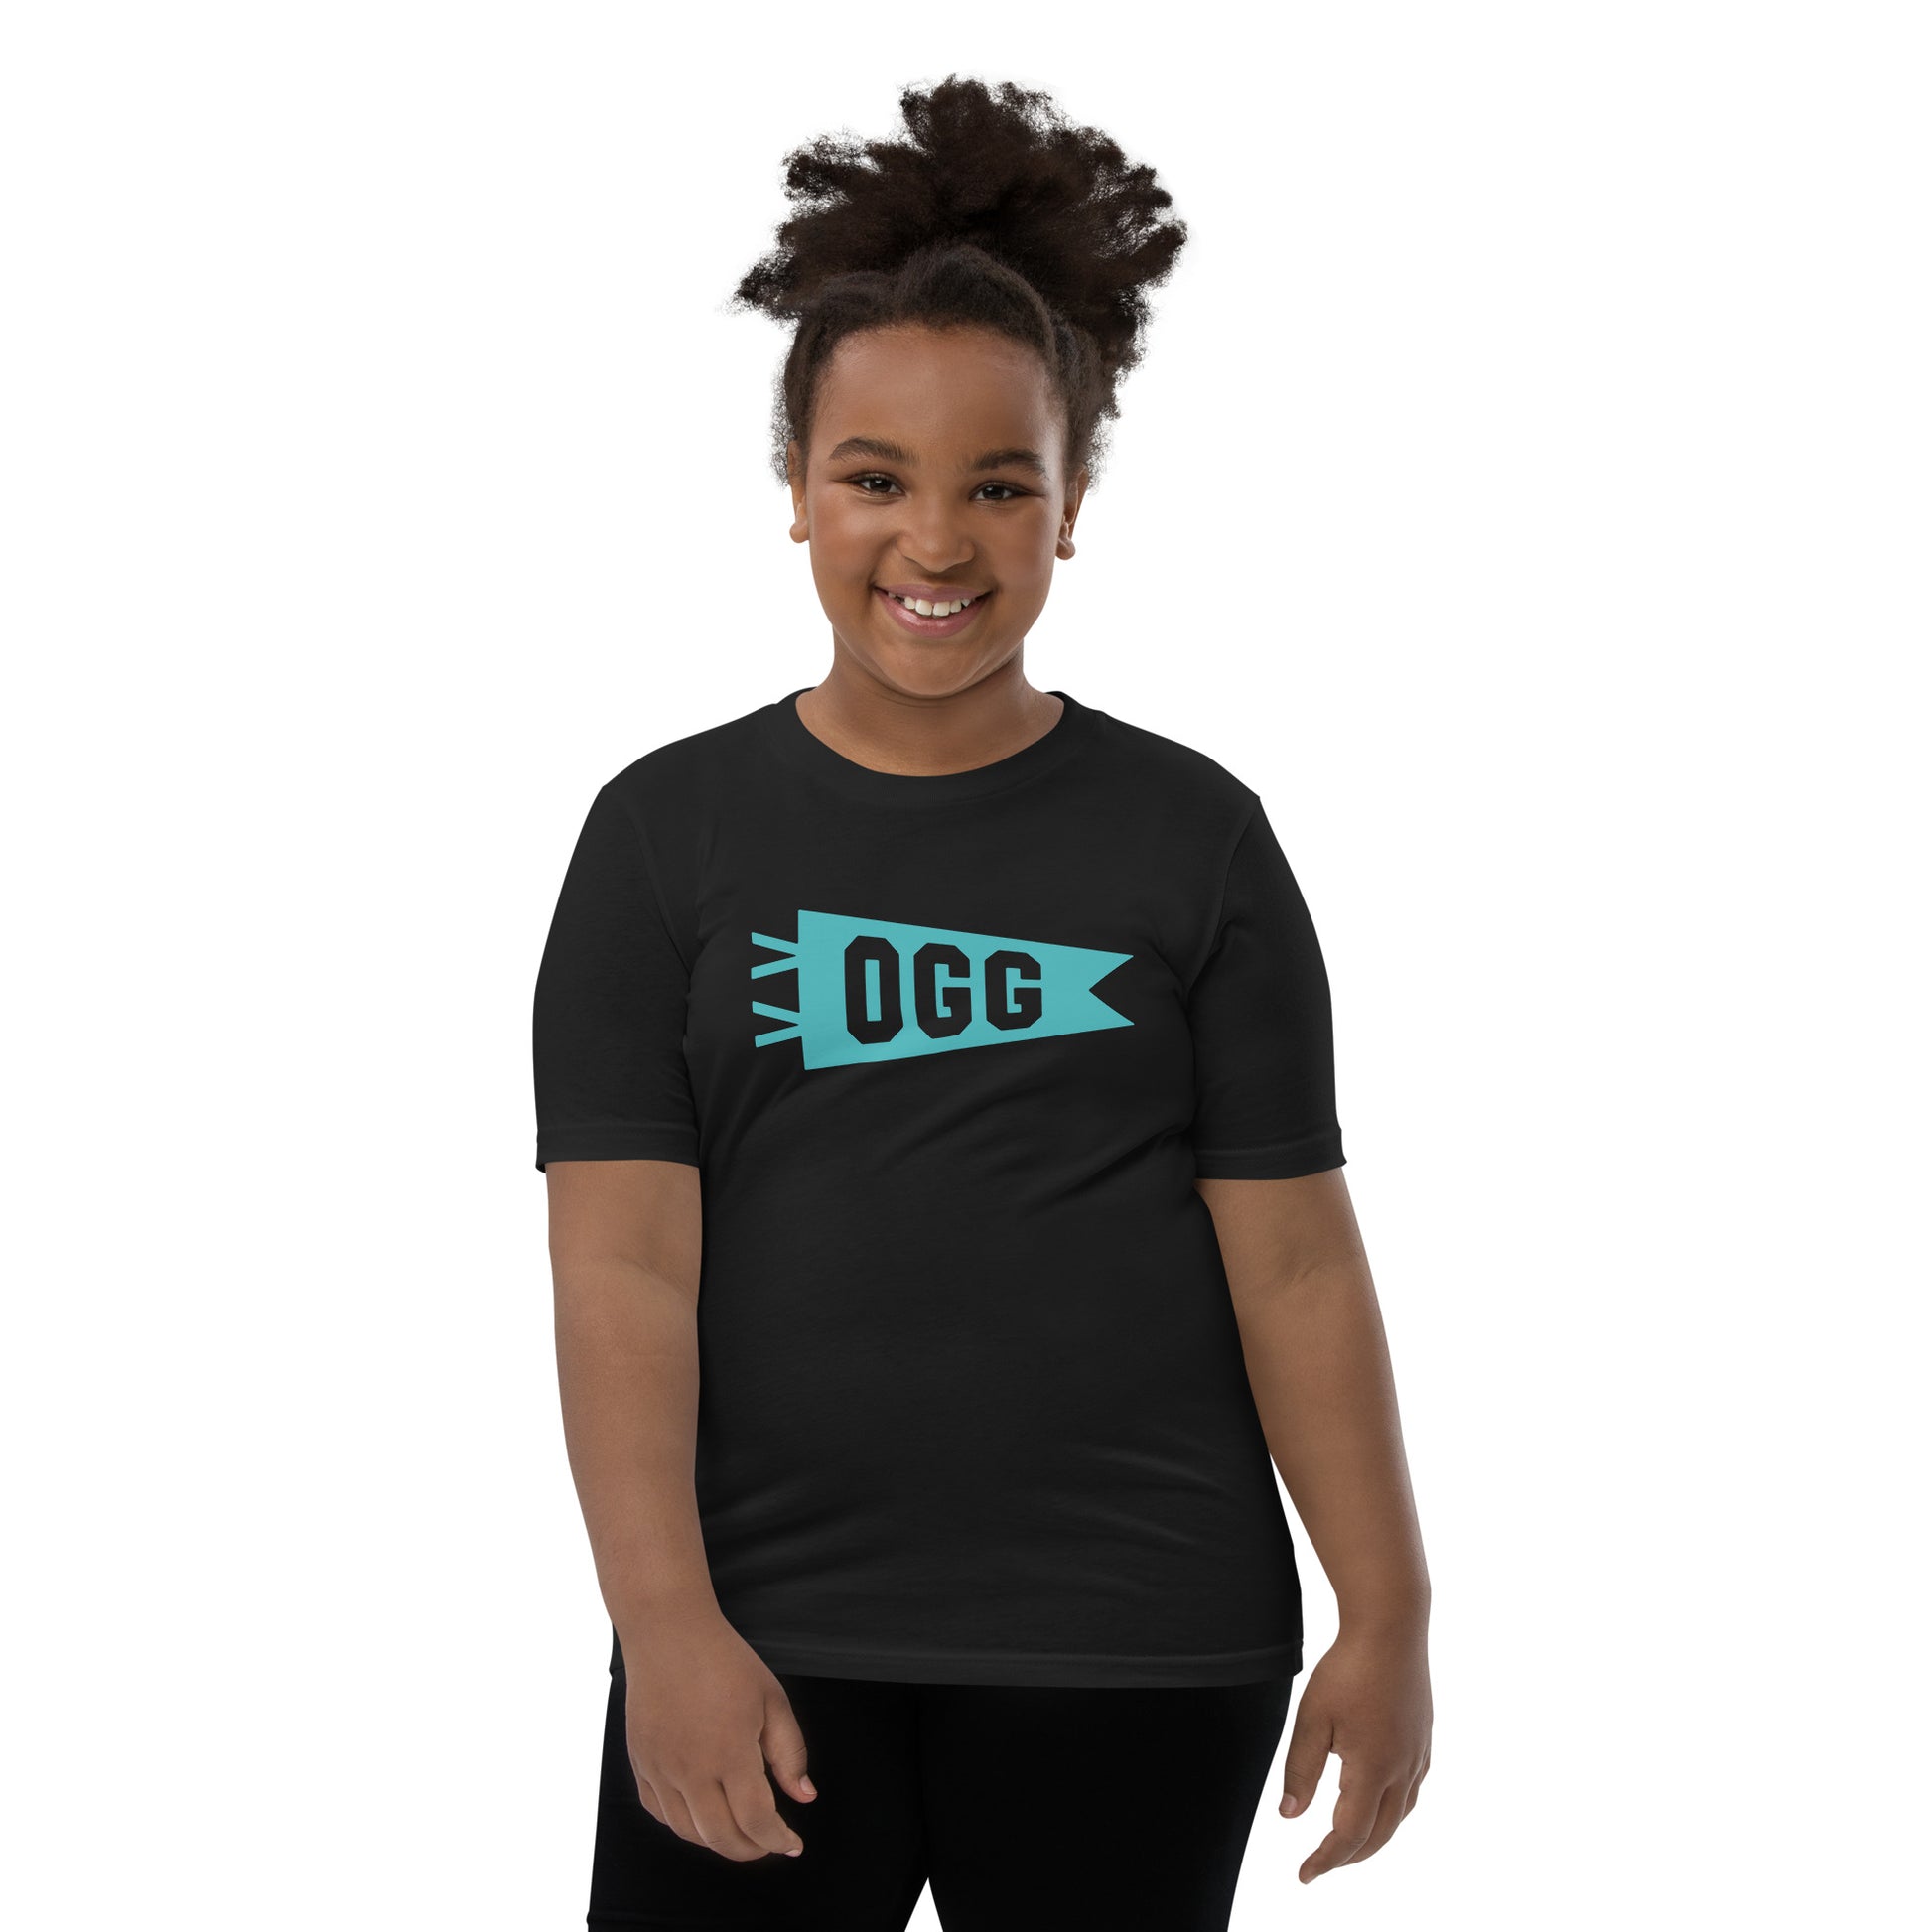 Kid's Airport Code Tee - Viking Blue Graphic • OGG Maui • YHM Designs - Image 05